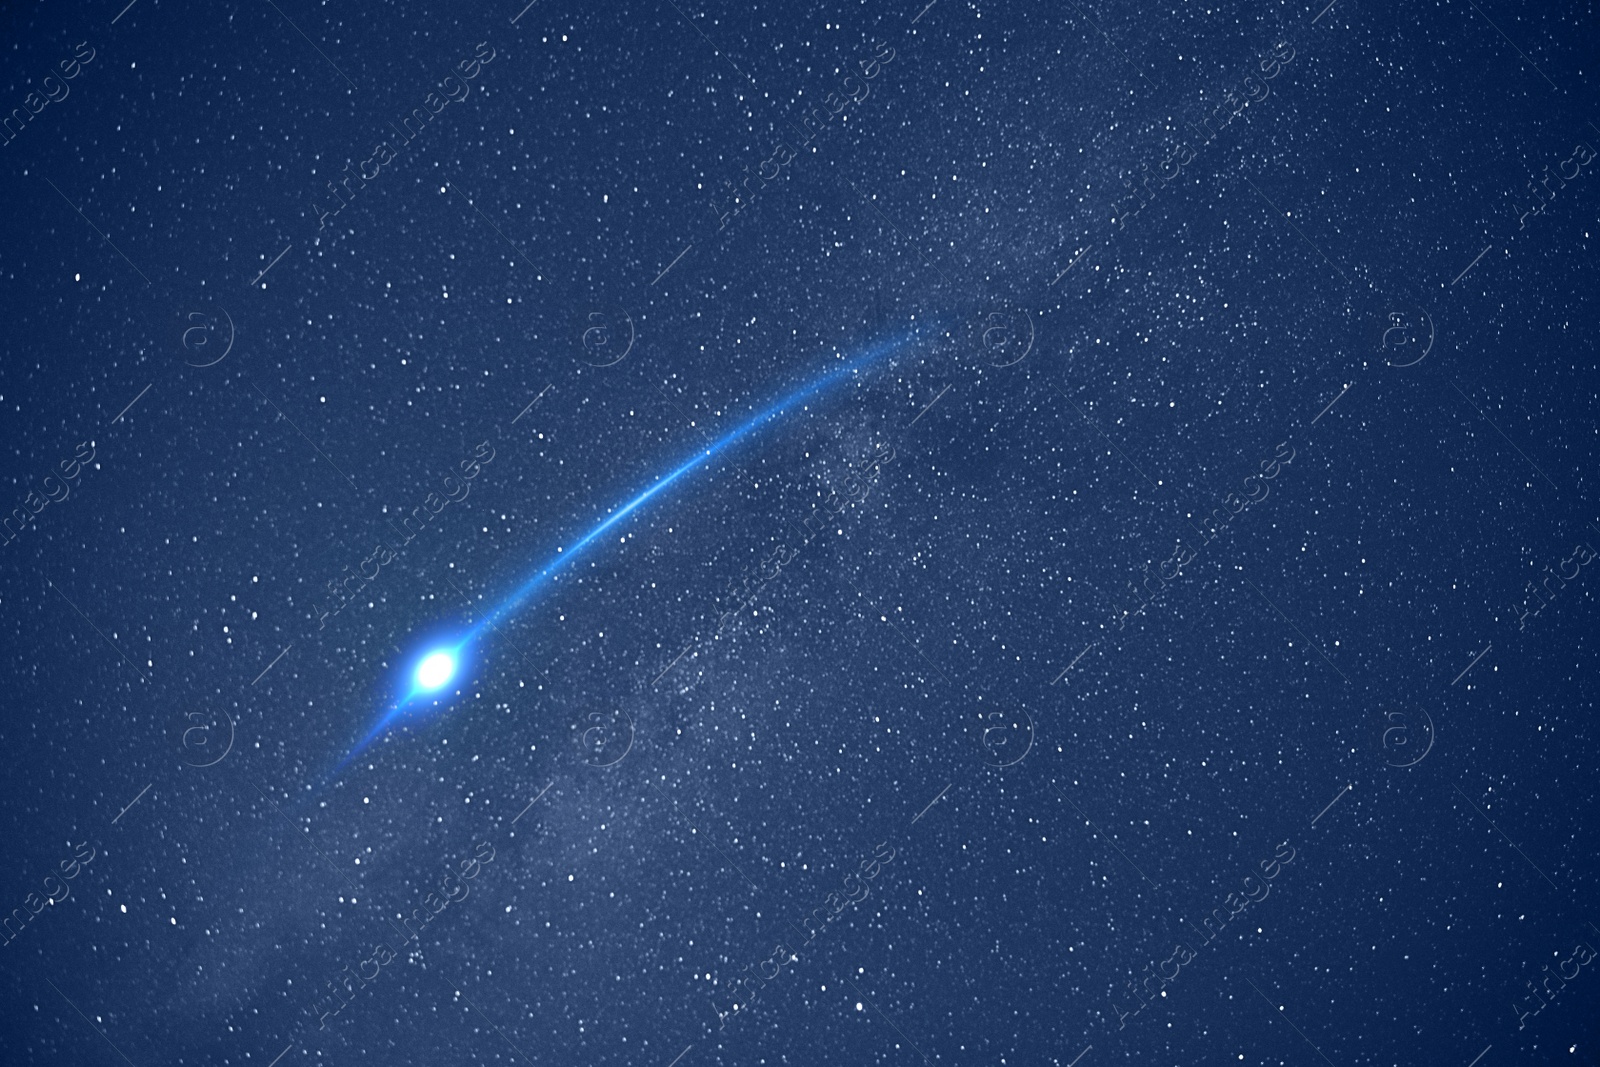 Image of Beautiful view of shooting star in night sky